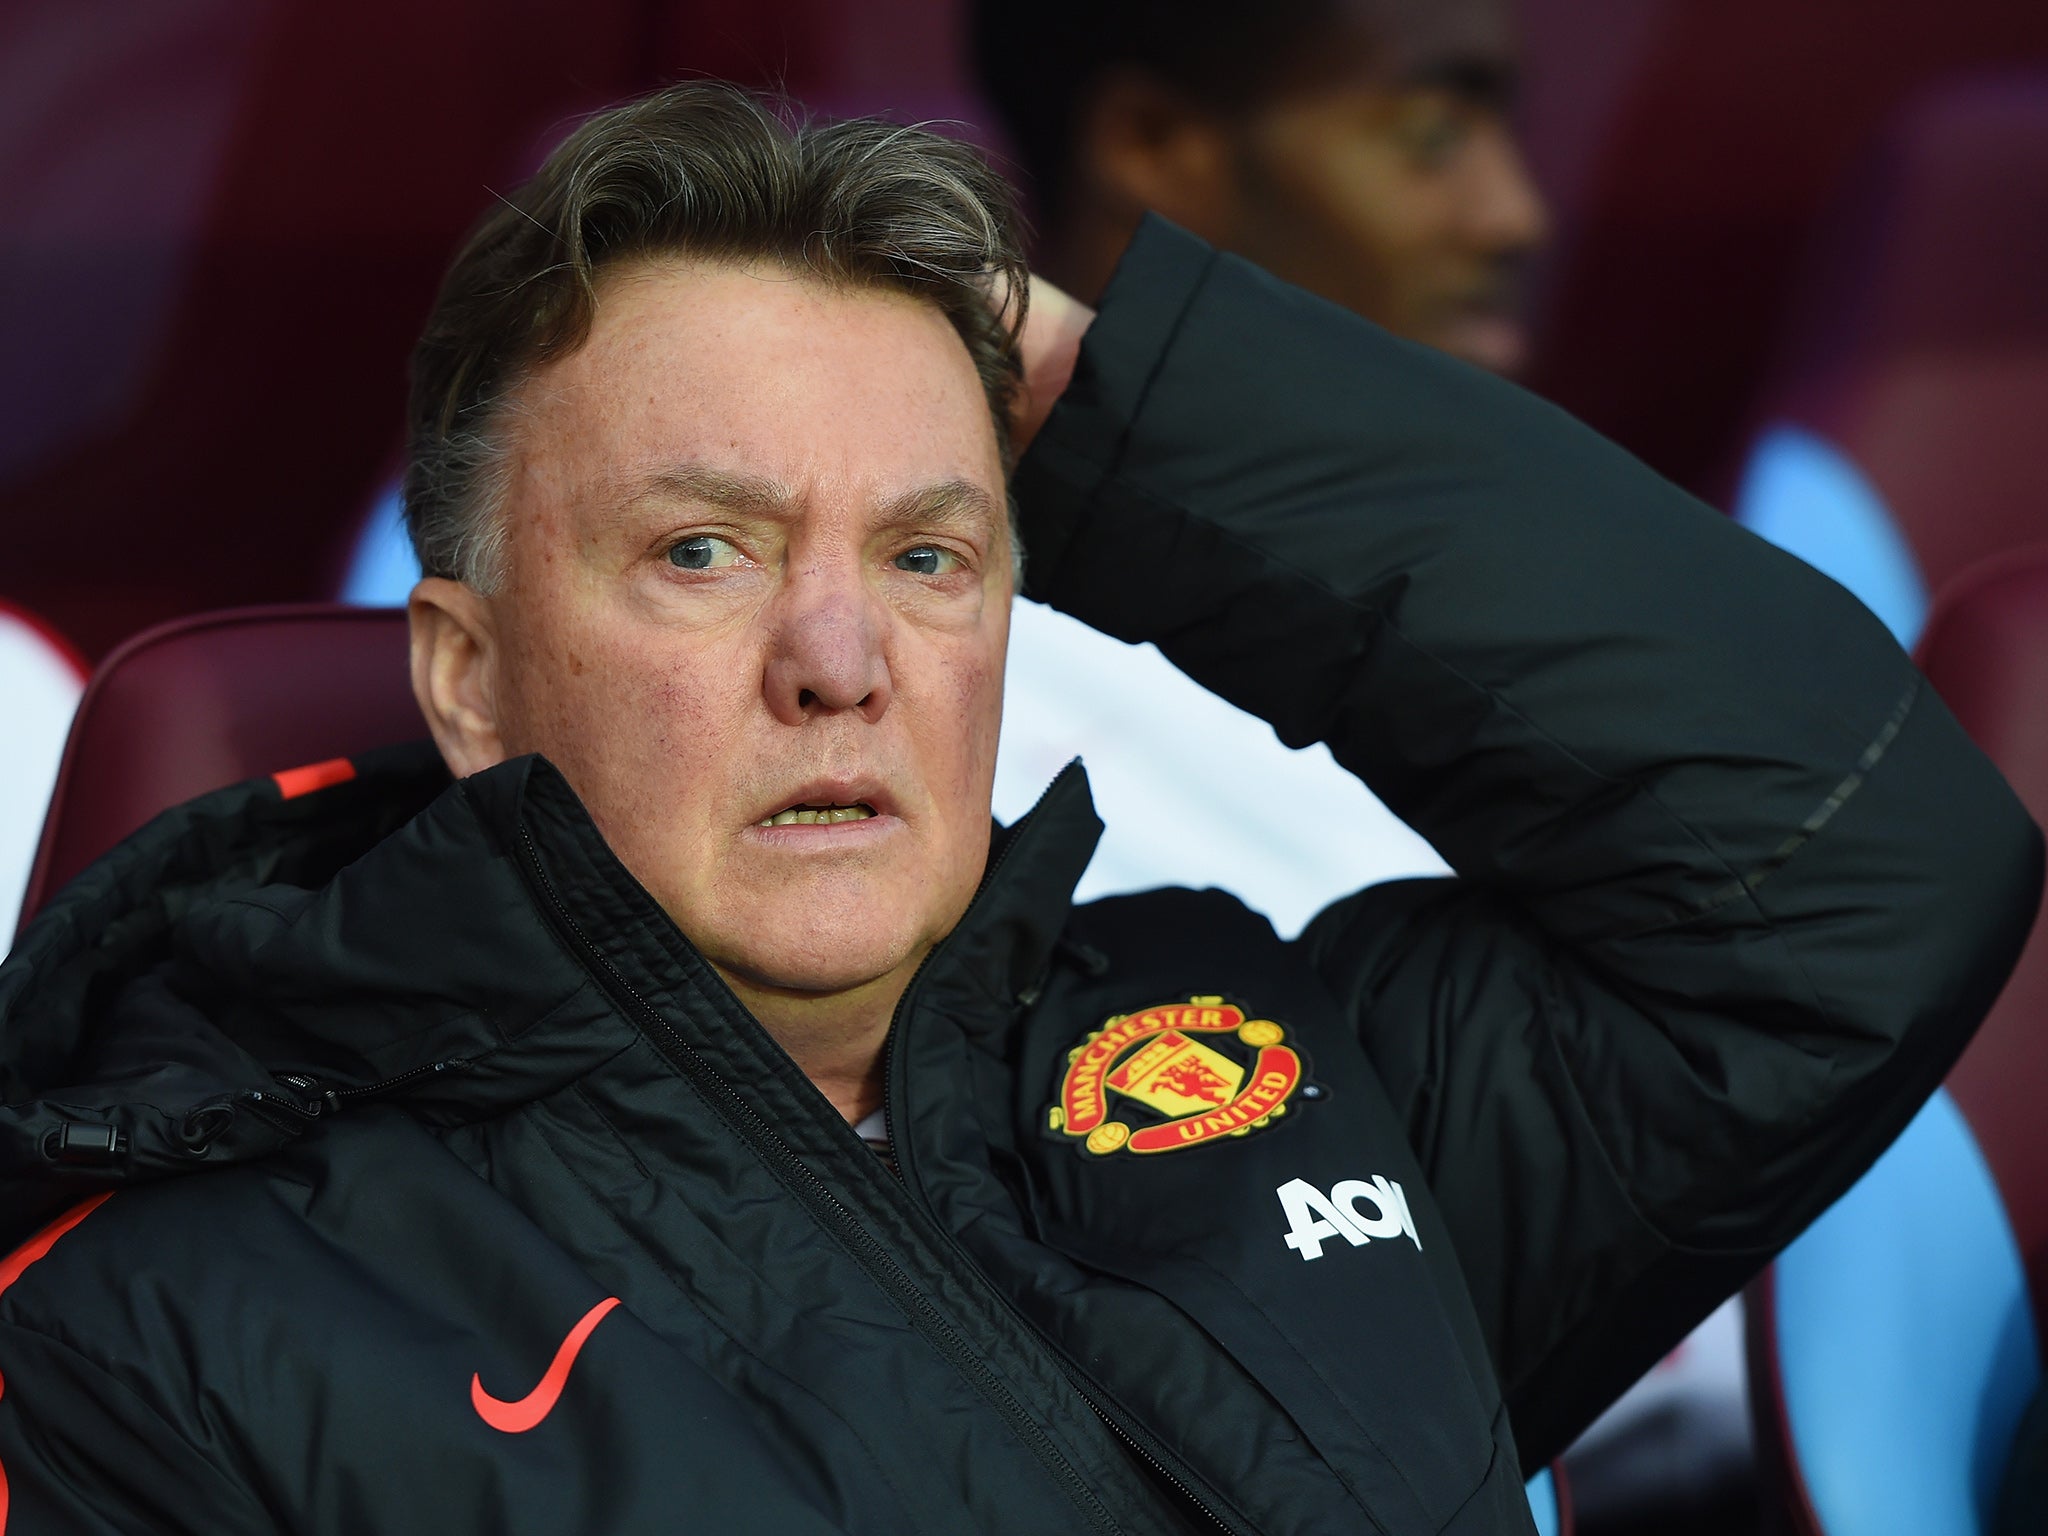 Louis van Gaal has had to rely on players who were already at the club - largely because of extensive injury problems